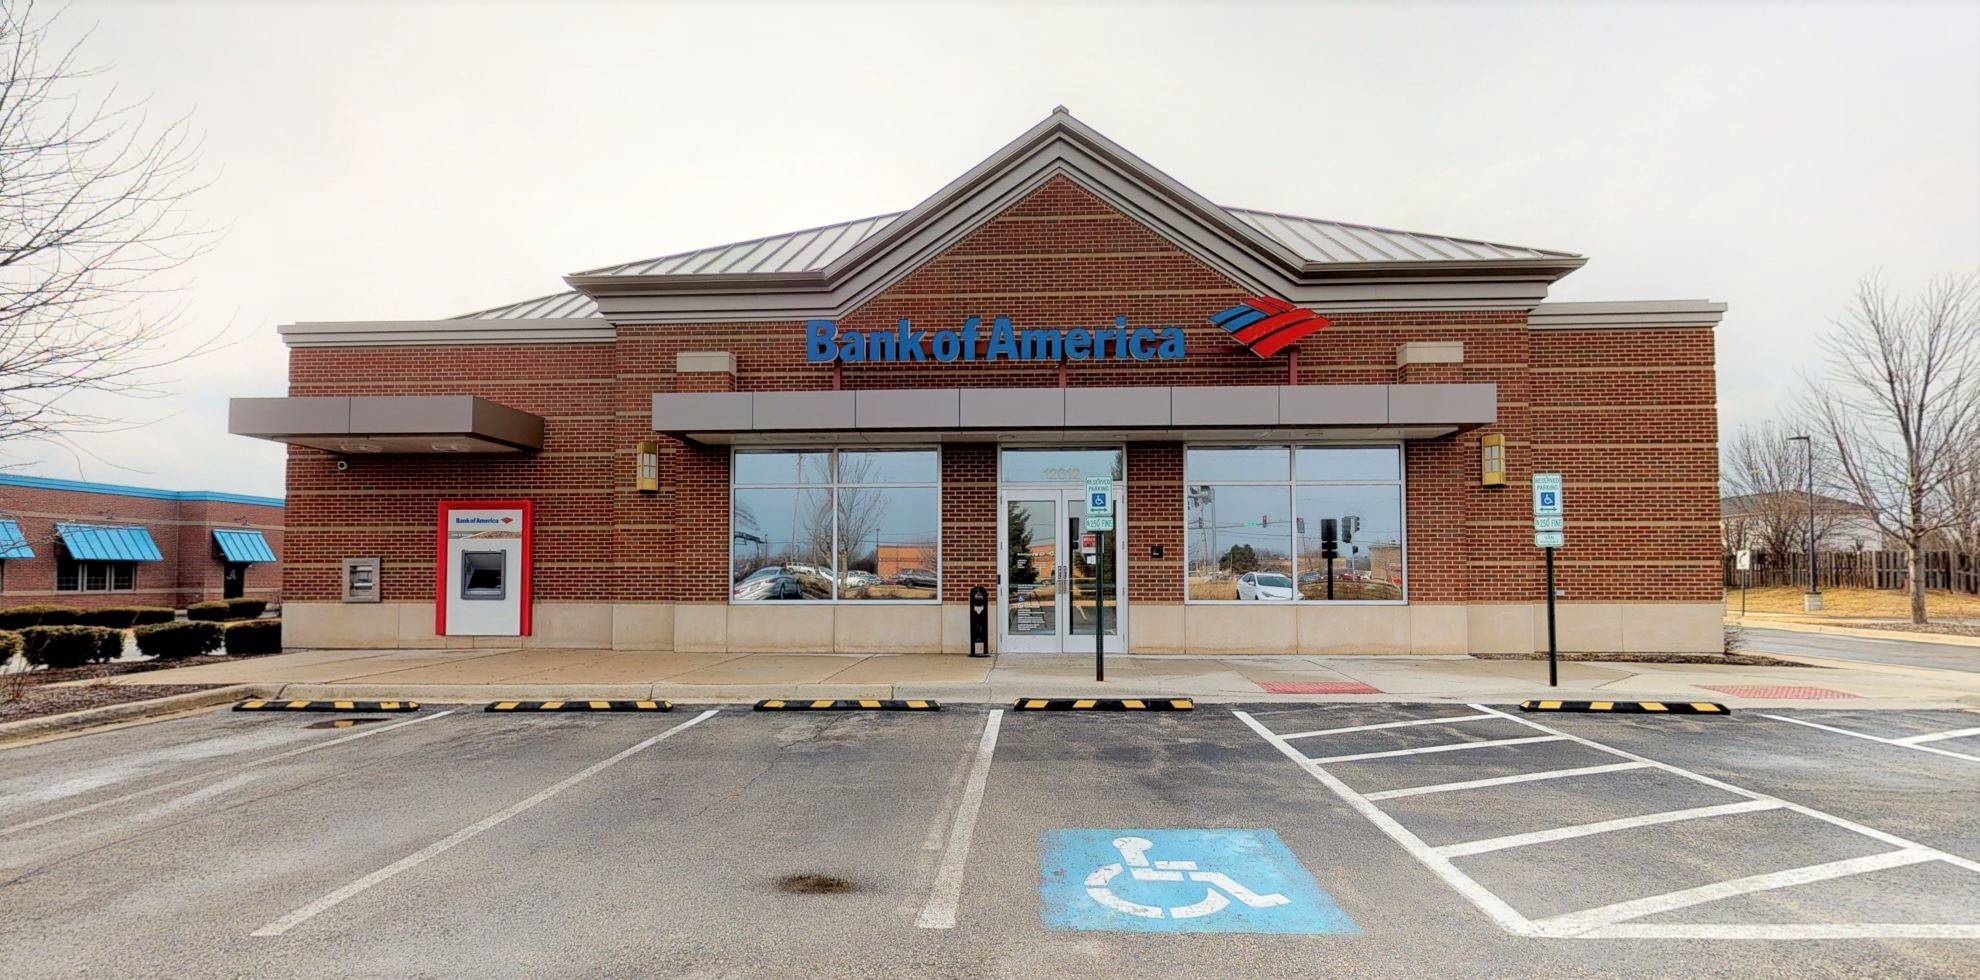 Bank of America financial center with drive-thru ATM | 12612 S State Route 59, Plainfield, IL 60585